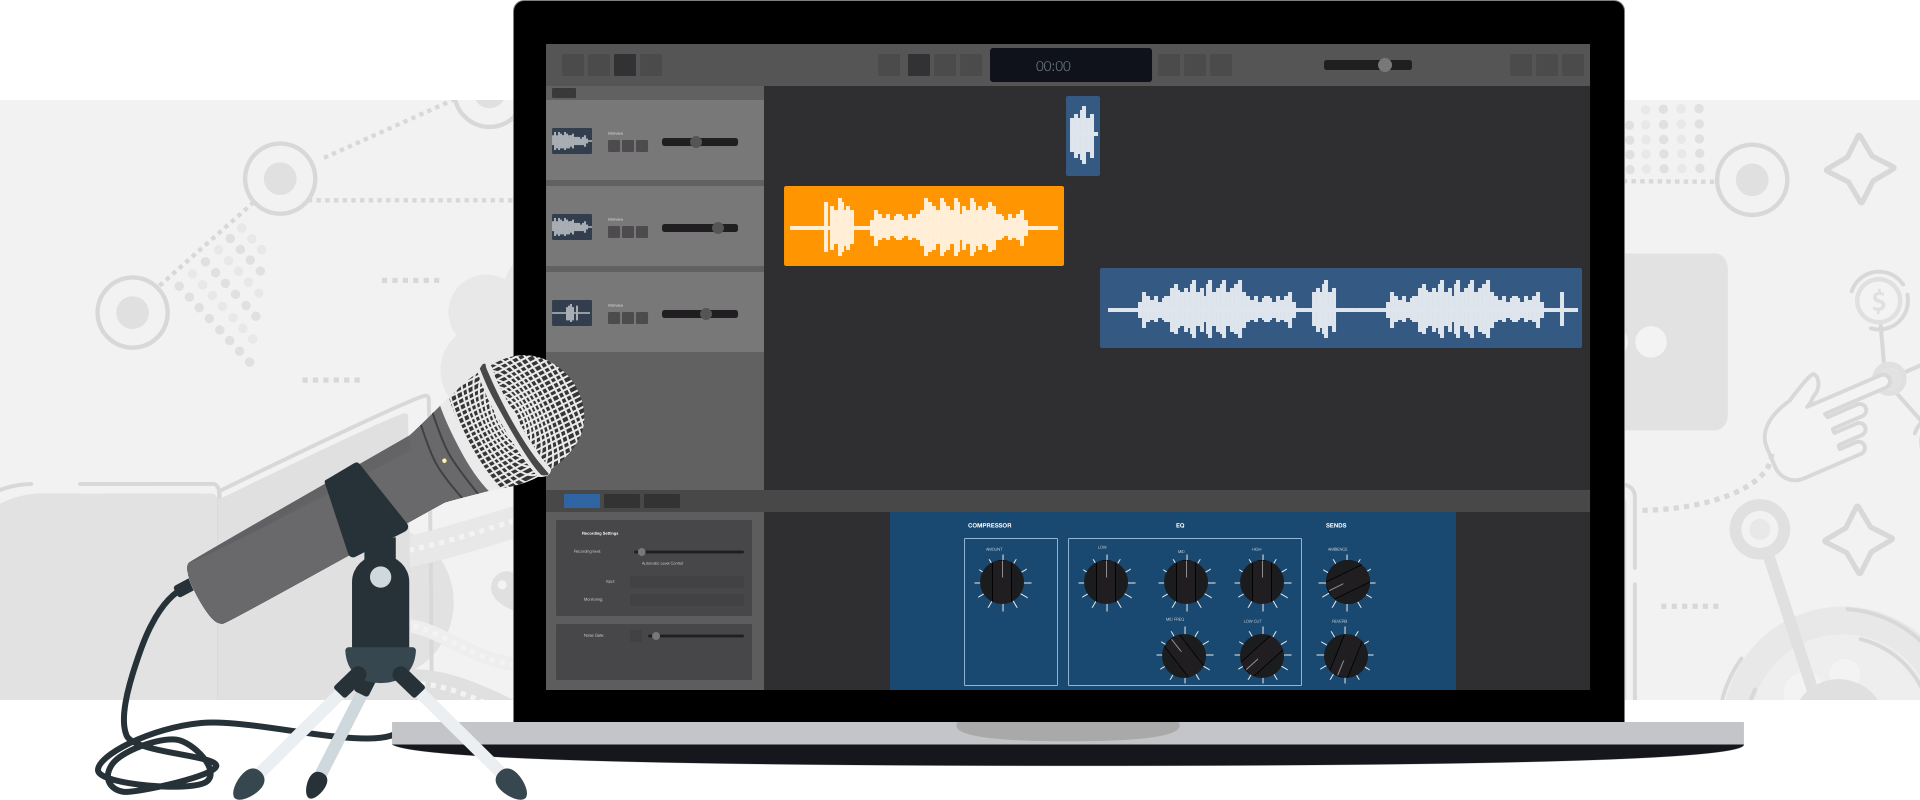 podcast audioh ardware for mac